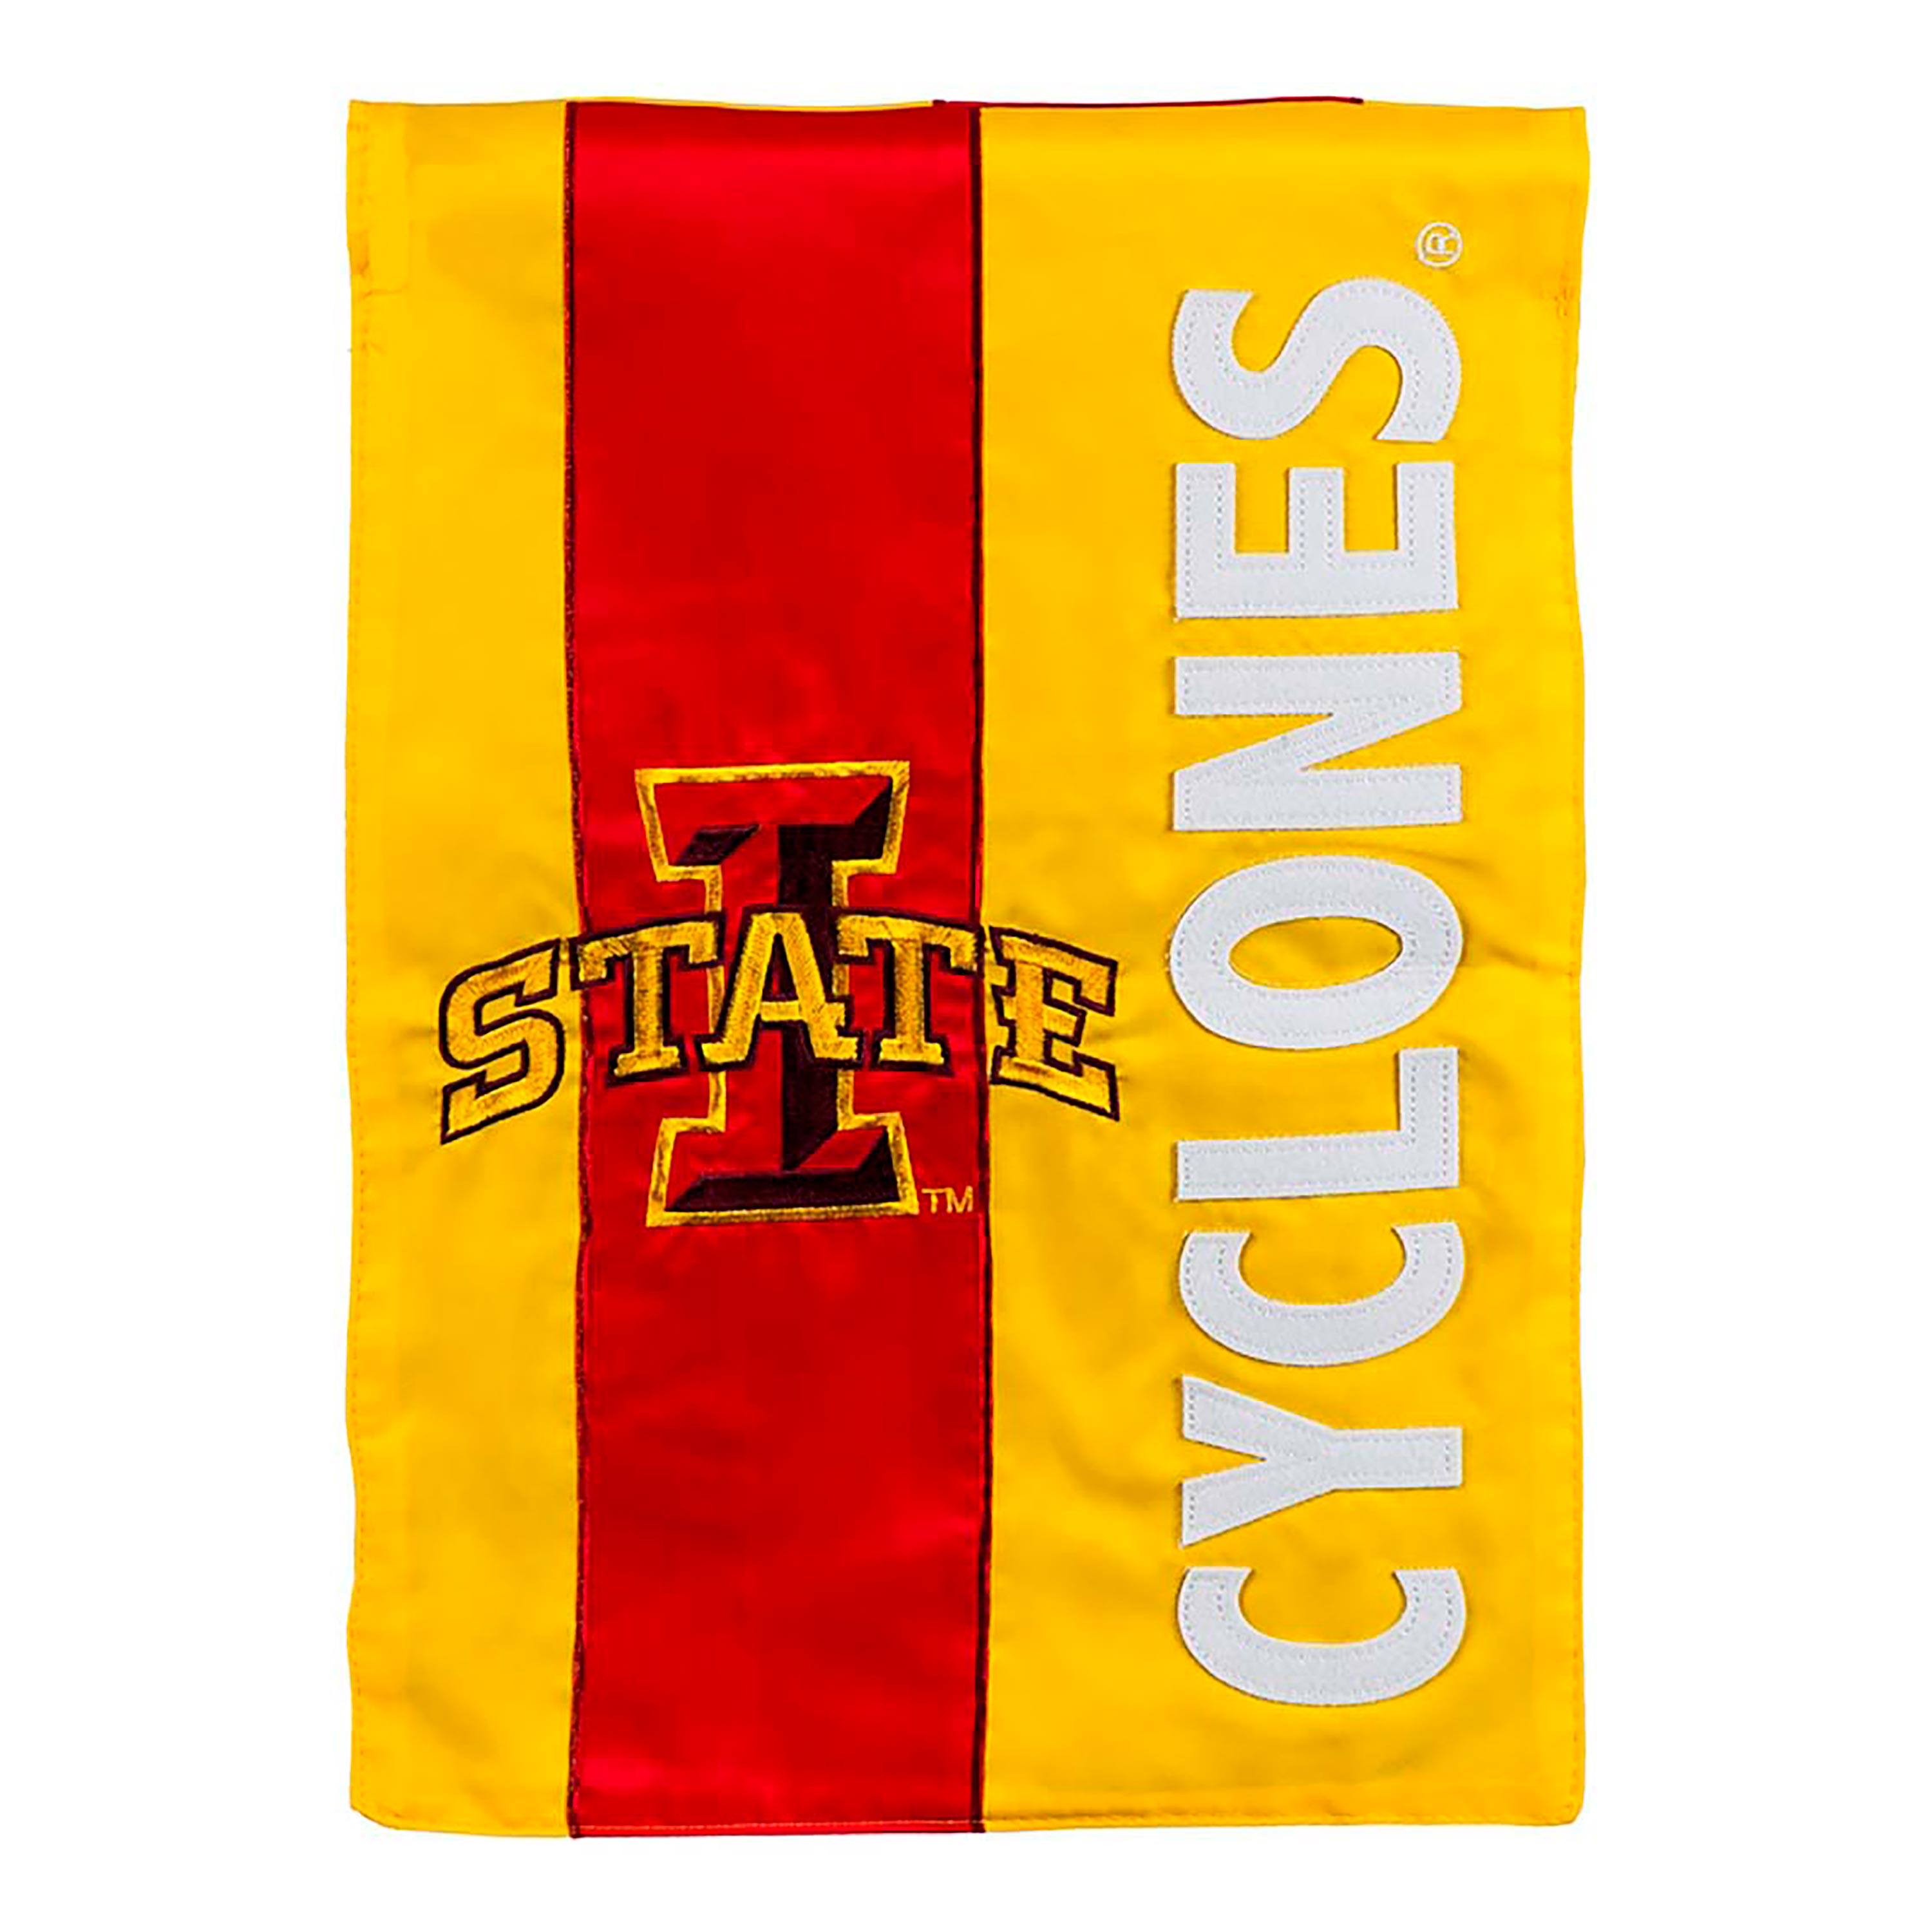 Double-Sided Embellished College Team Pride Applique House Flag - Iowa State